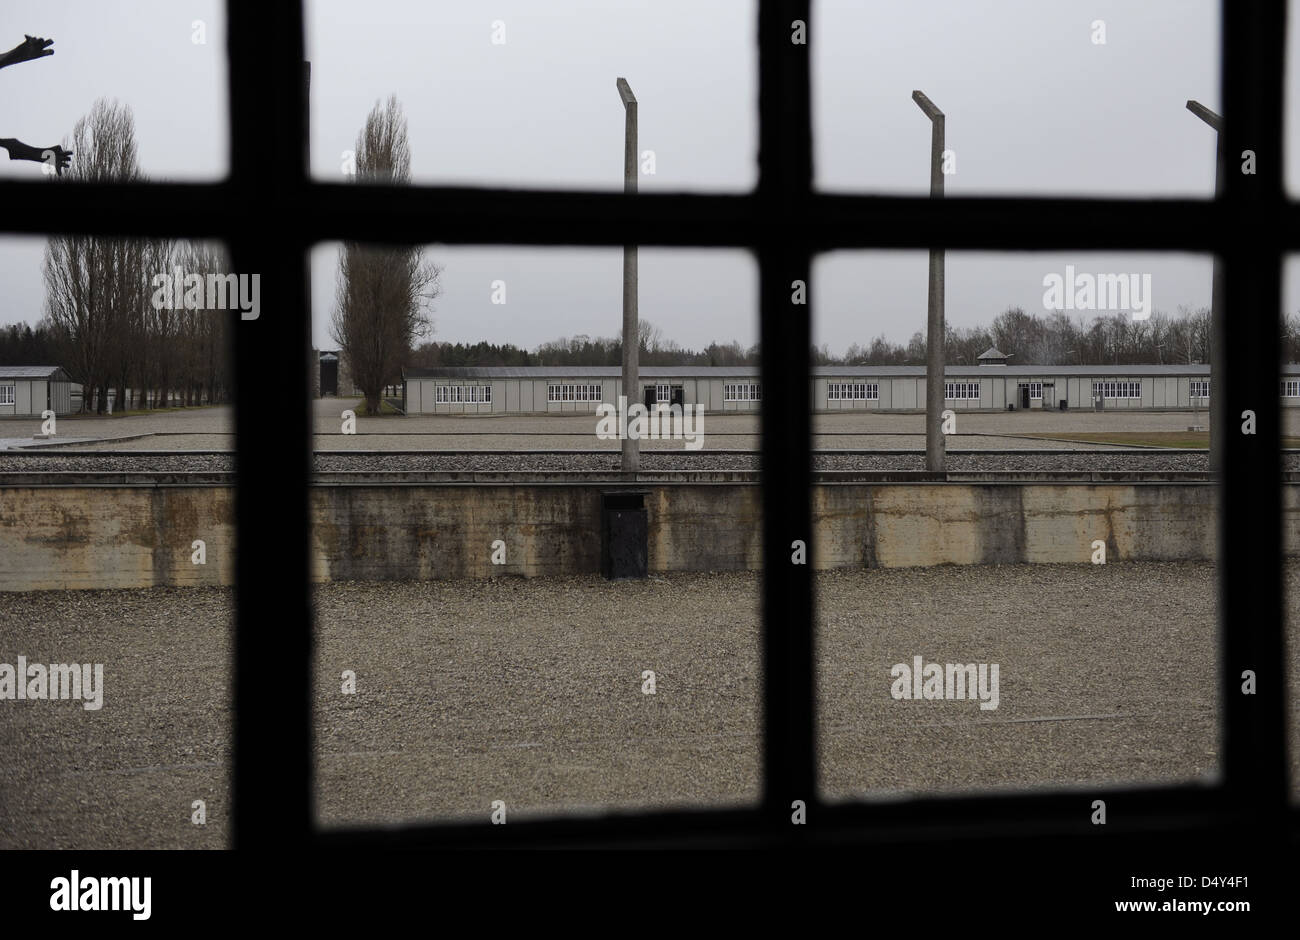 Dachau Concentration Camp. Nazi camp of prisoners opened in 1933. Exterior view from inside a barrack. Germany. Stock Photo